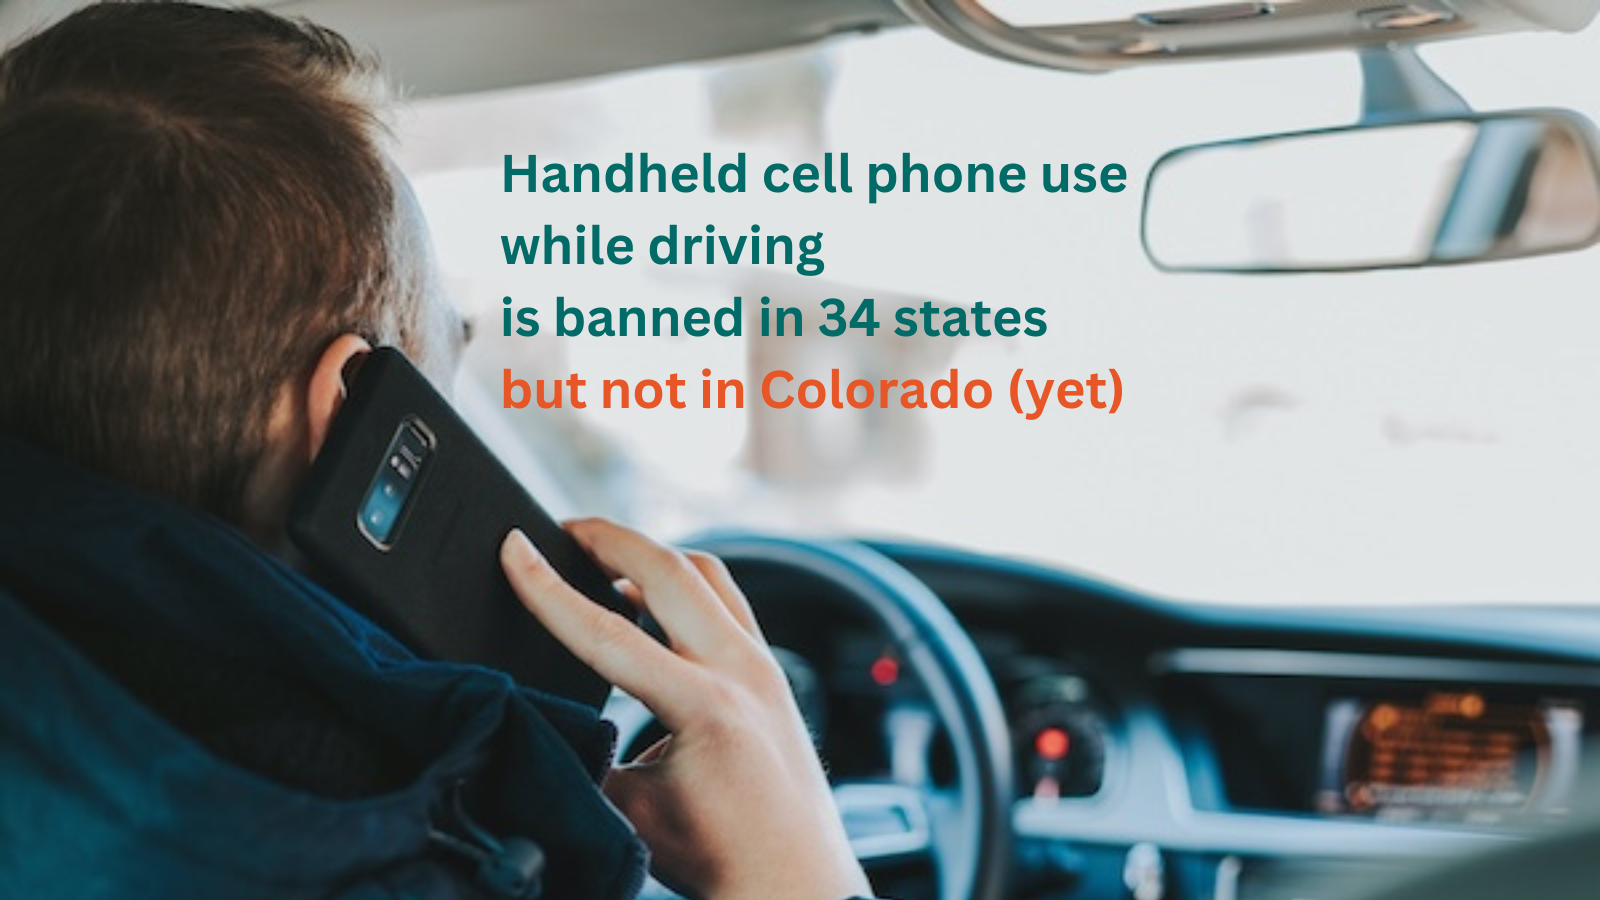 Person driving a car while holding a cell phone to their ear and text "handheld cell phone use while driving is banned in 34 states but not in Colorado (yet)"